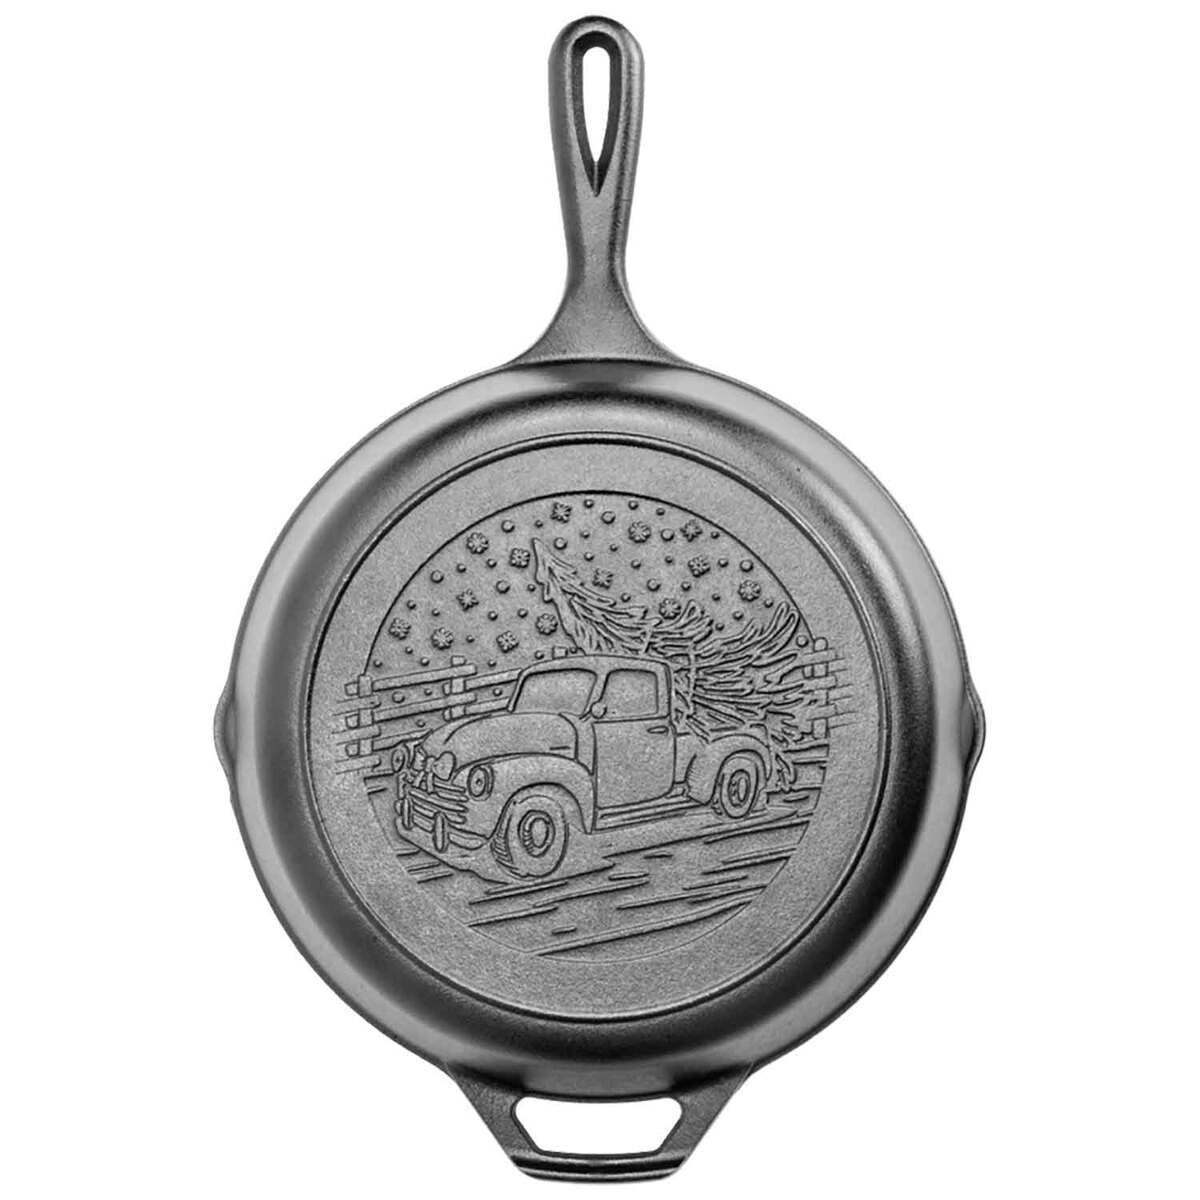 Lodge Pro Logic Cast Iron 10.25in Round Grill Pan